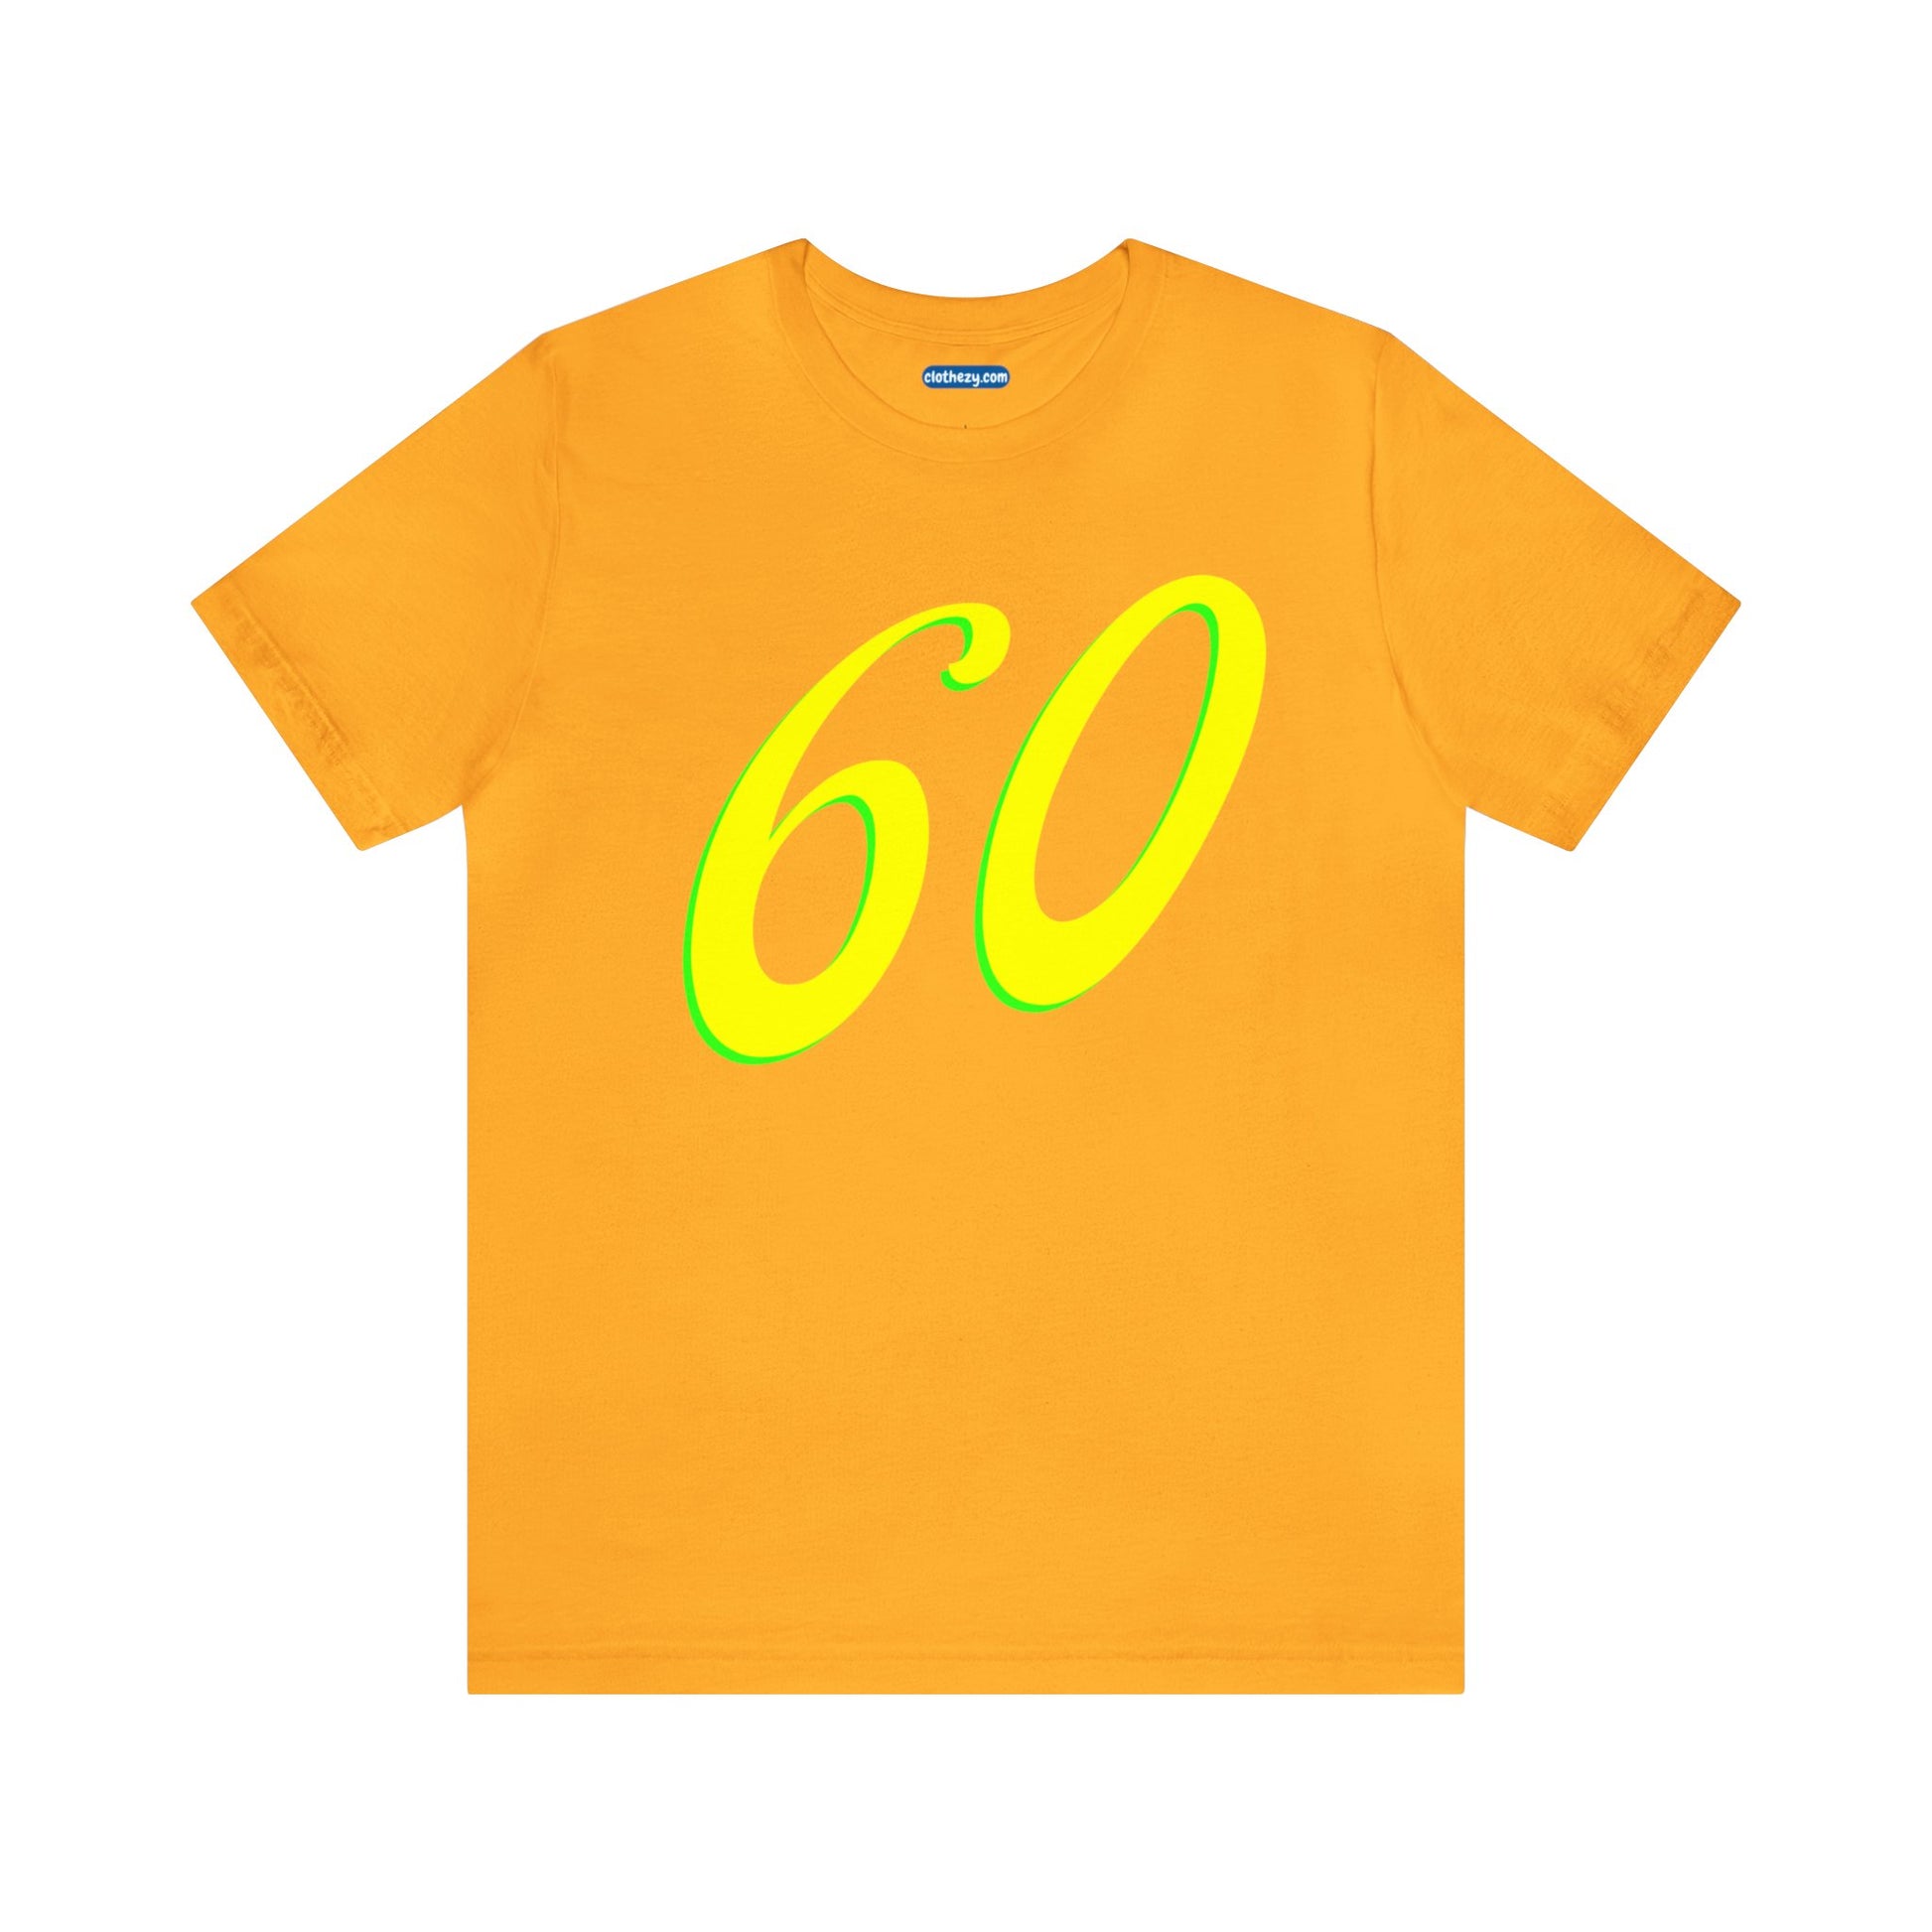 Number 60 Design - Soft Cotton Tee for birthdays and celebrations, Gift for friends and family, Multiple Options by clothezy.com in Gold Size Small - Buy Now